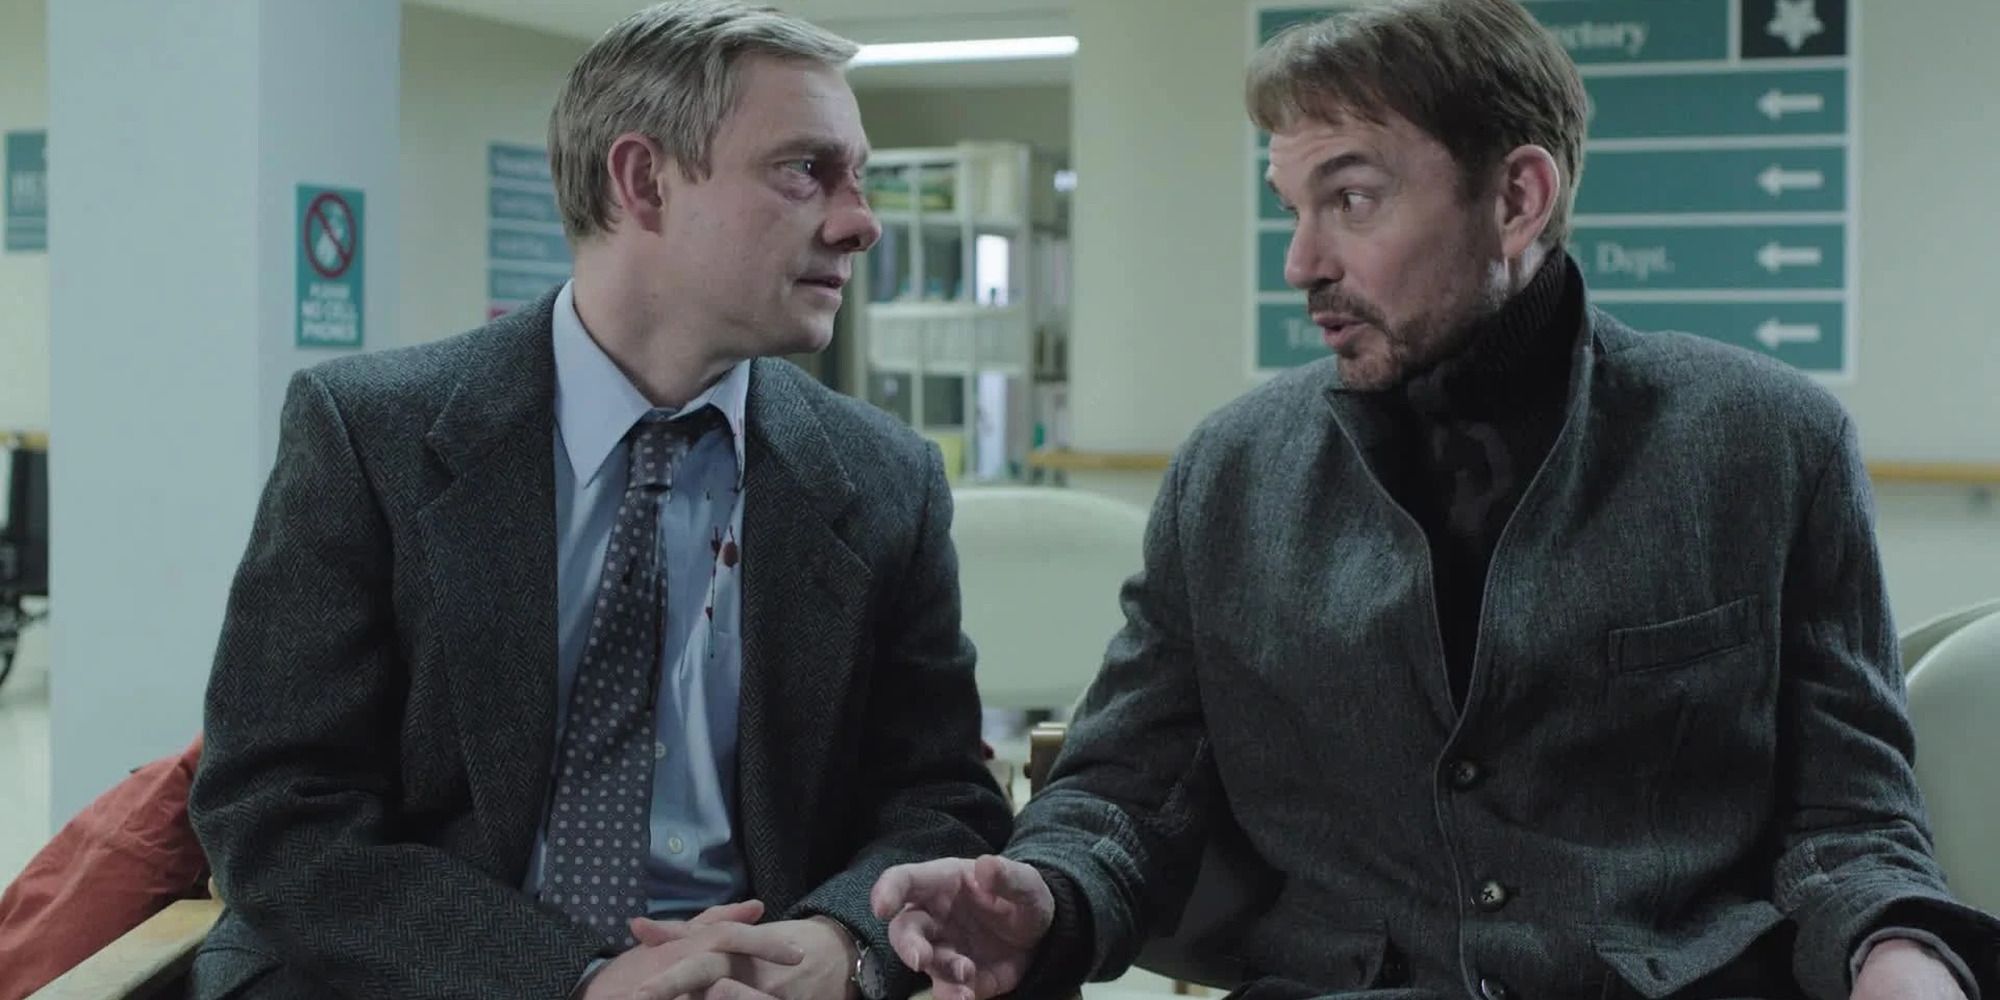 Lester and Lorne from 'Fargo' speaking in a waiting room